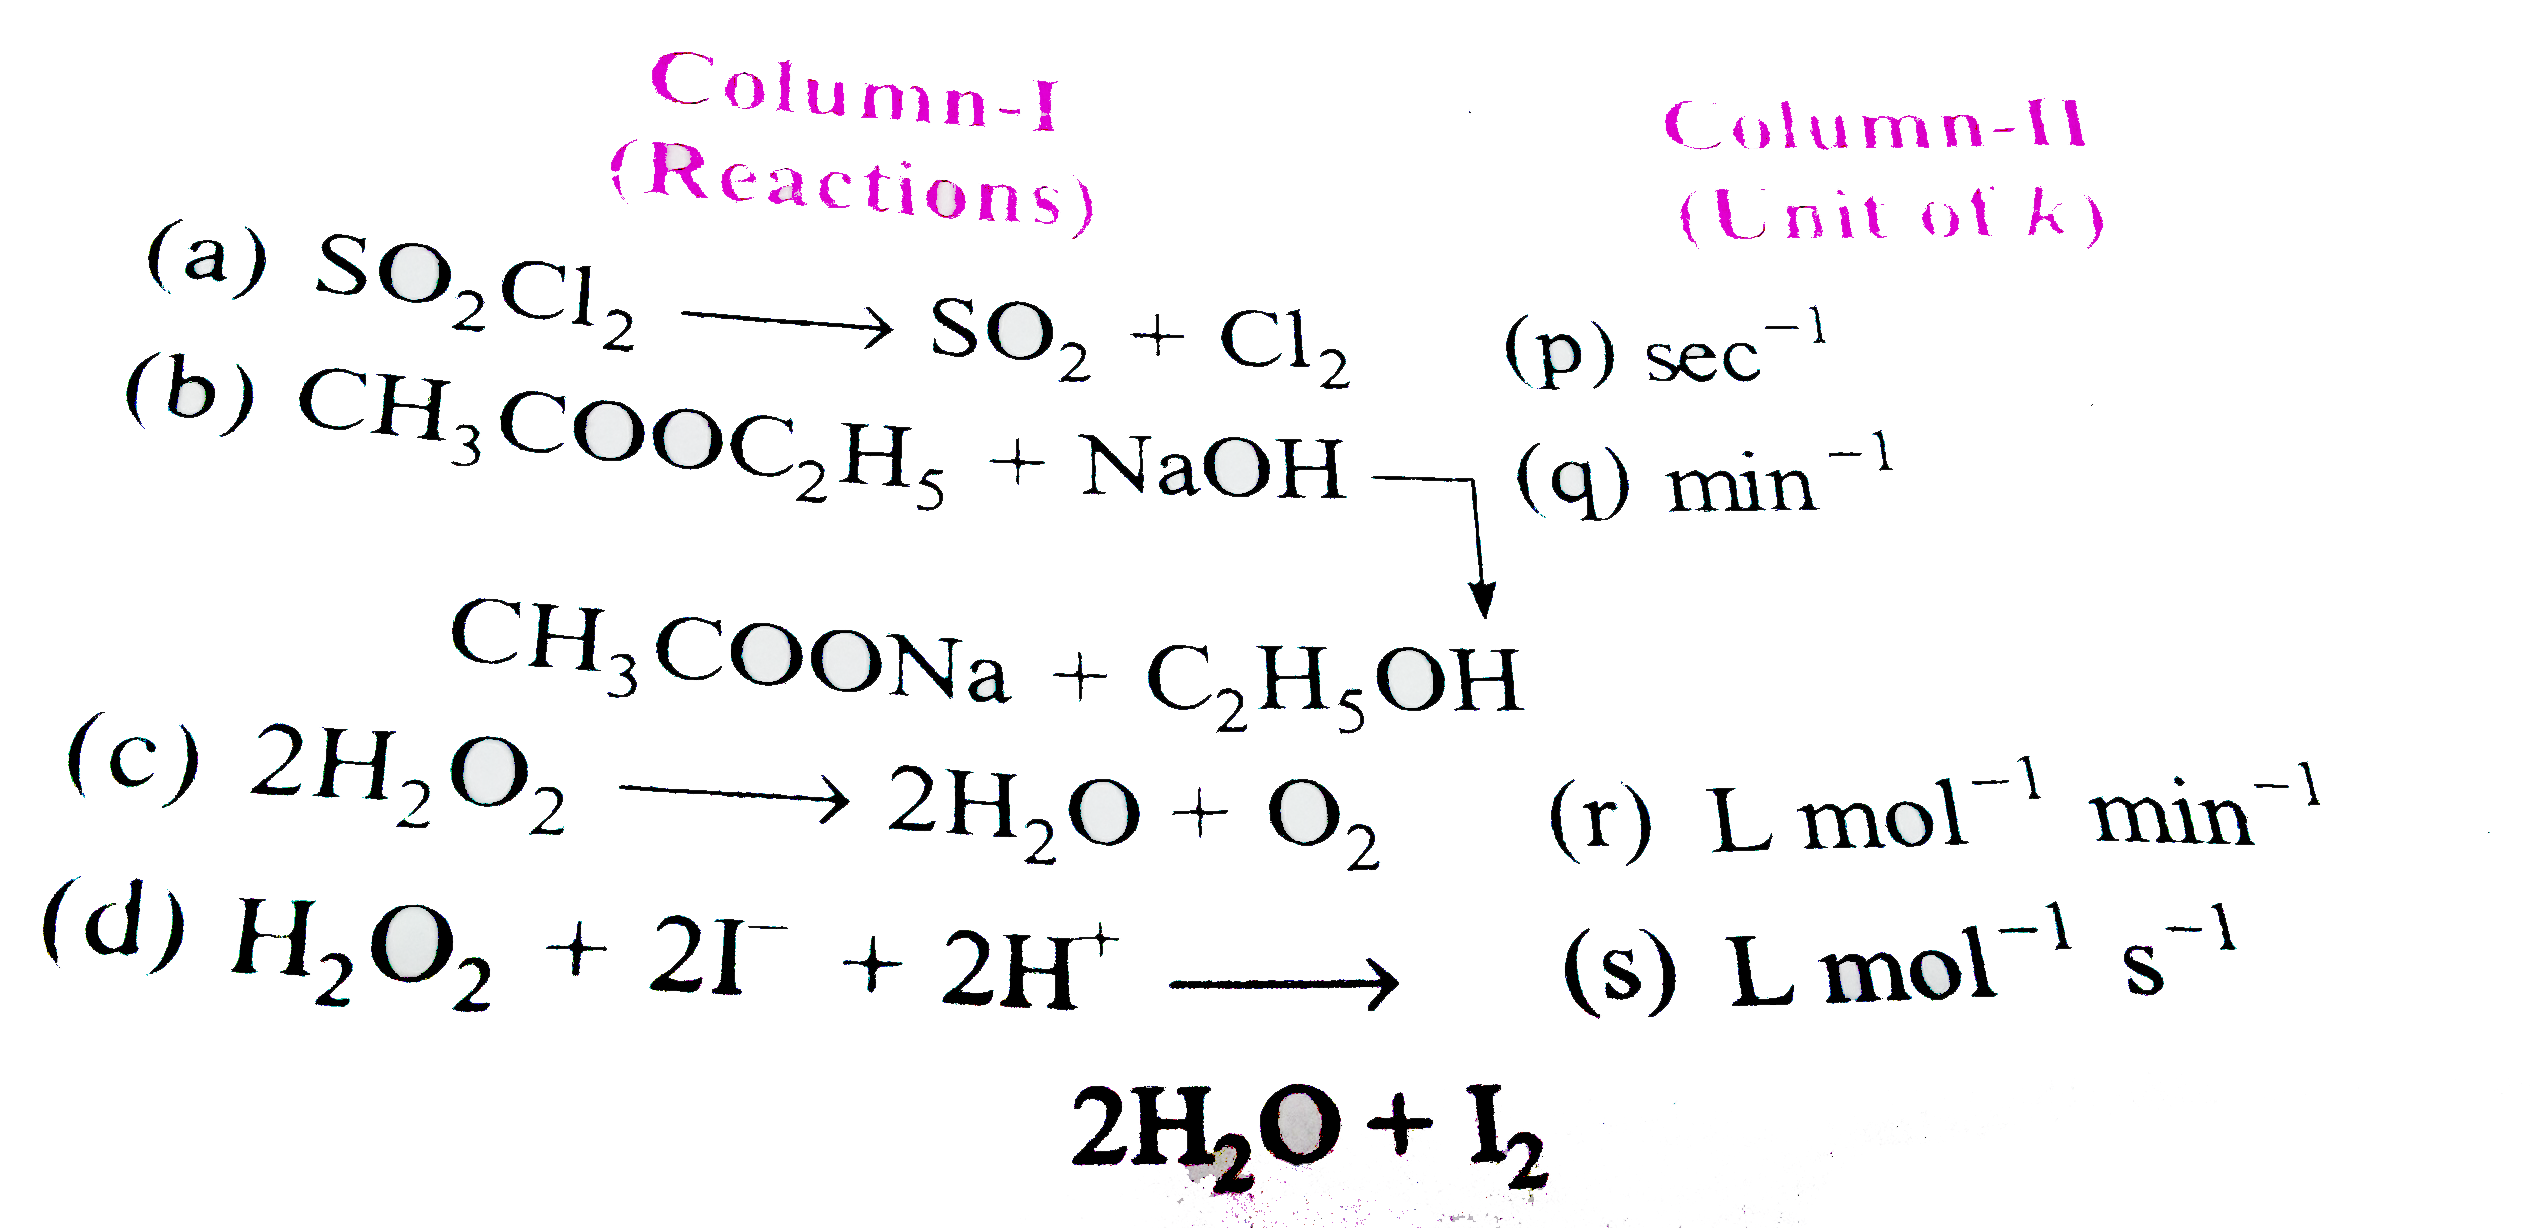 Match the reaction in Column-I with the units of their rate constant is Colum-II